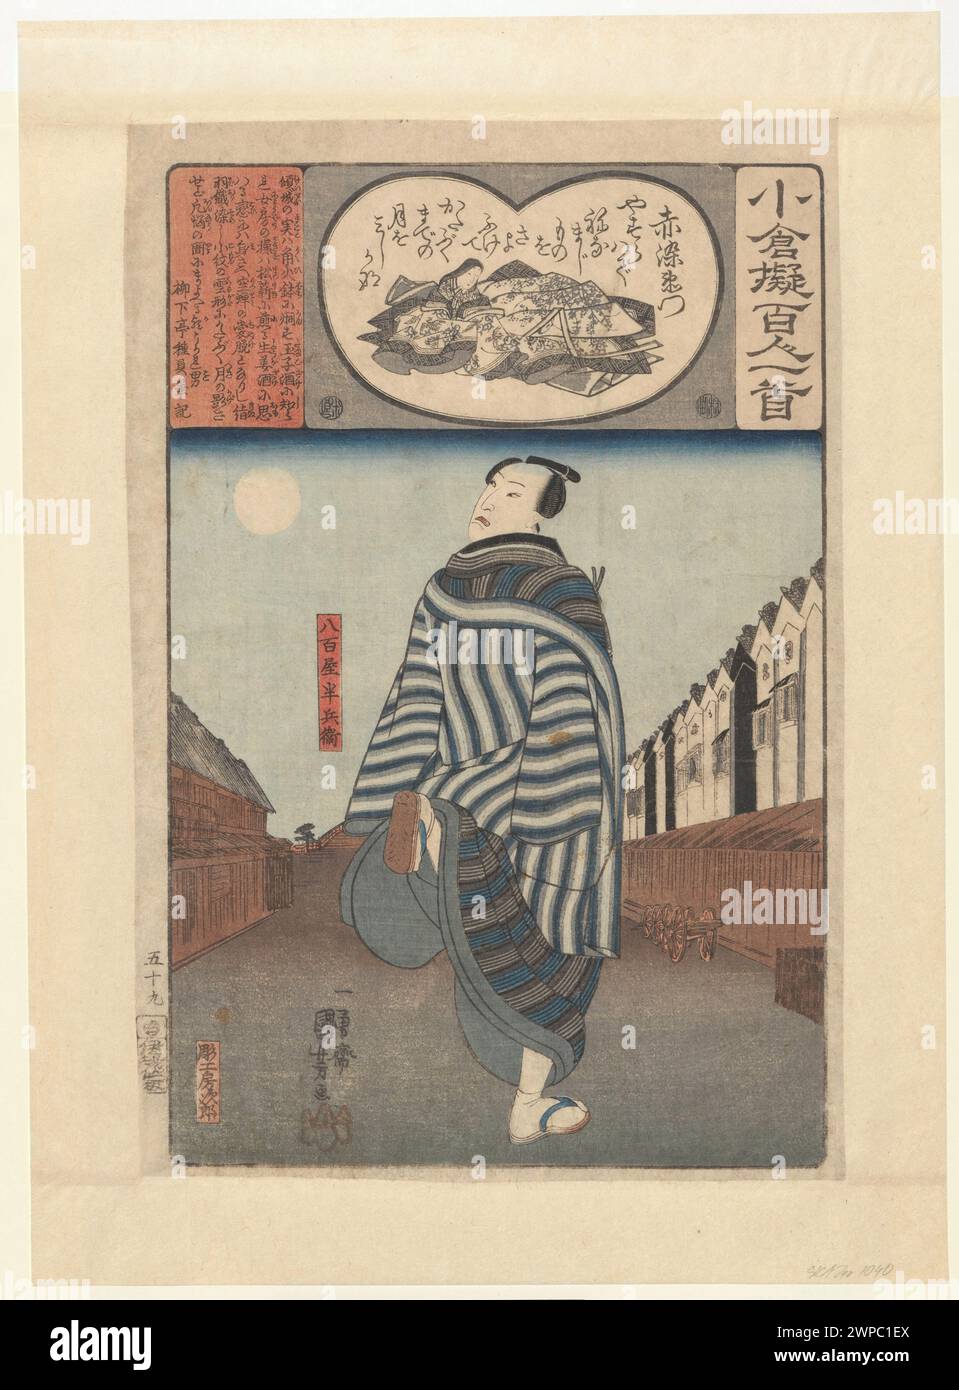 Yaoya Hanbei with a poem Akazome Emon, No. 59 from the series 'Imacja of the collection from Ogura - one poem from a hundred poets' (Ogura Nazorae Hyakunin Isshu)Dembiński, Stanisław (1891-1940)-collection, decorative boards according to the anthology of a hundred poets, cycle, gift (provenance), woodcuts, Japanese (culture), Japanese art, ukiyo-e Stock Photo